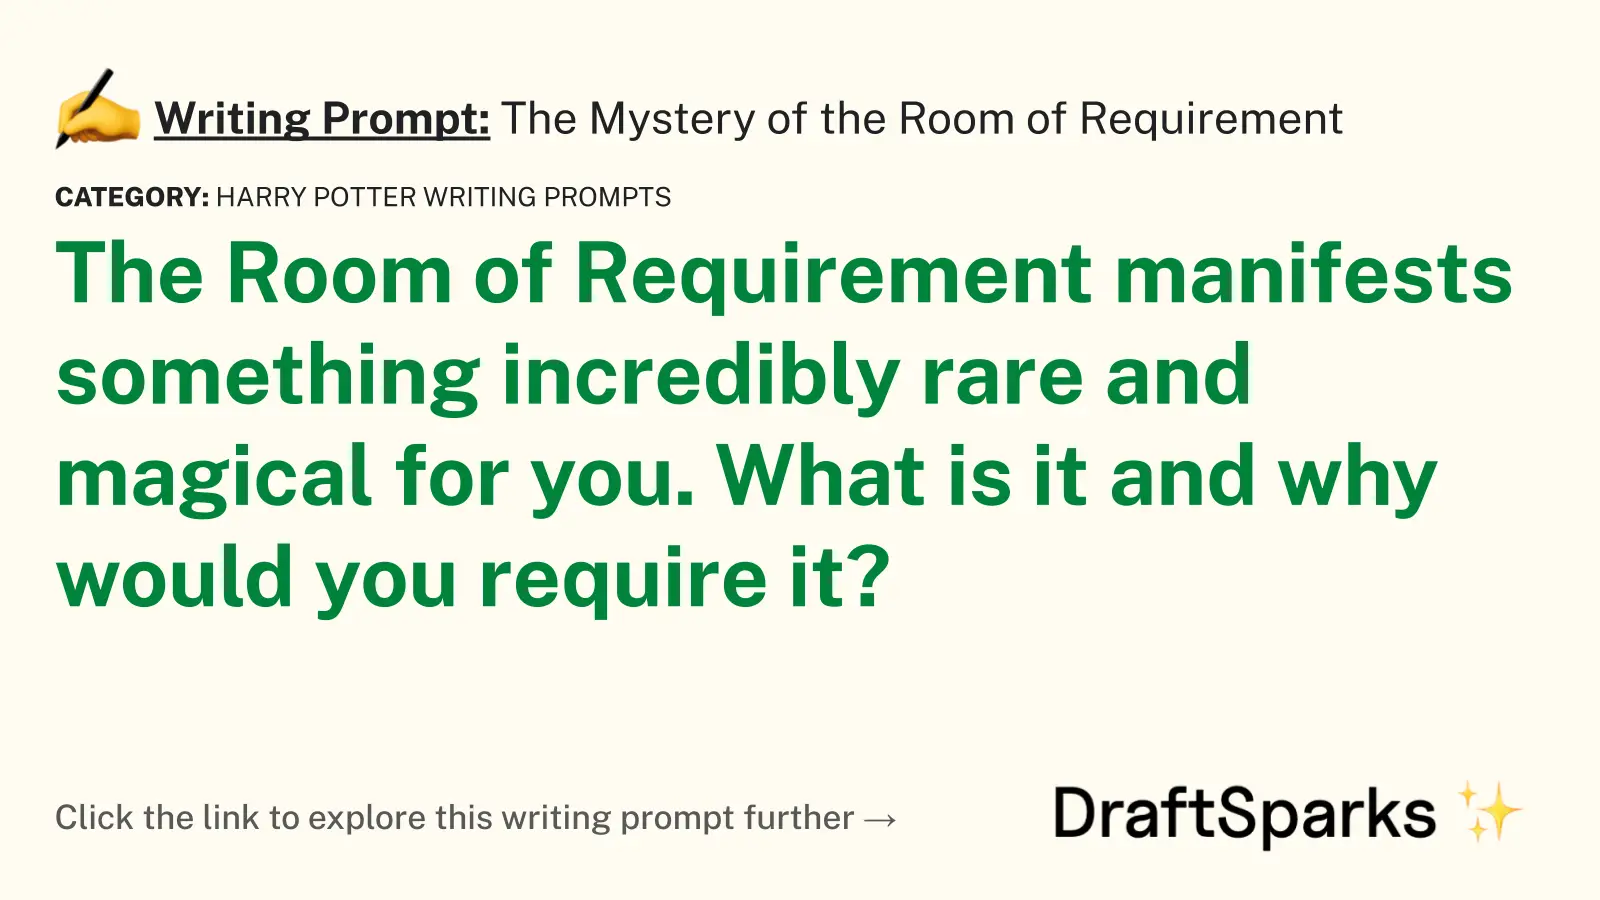 The Mystery of the Room of Requirement